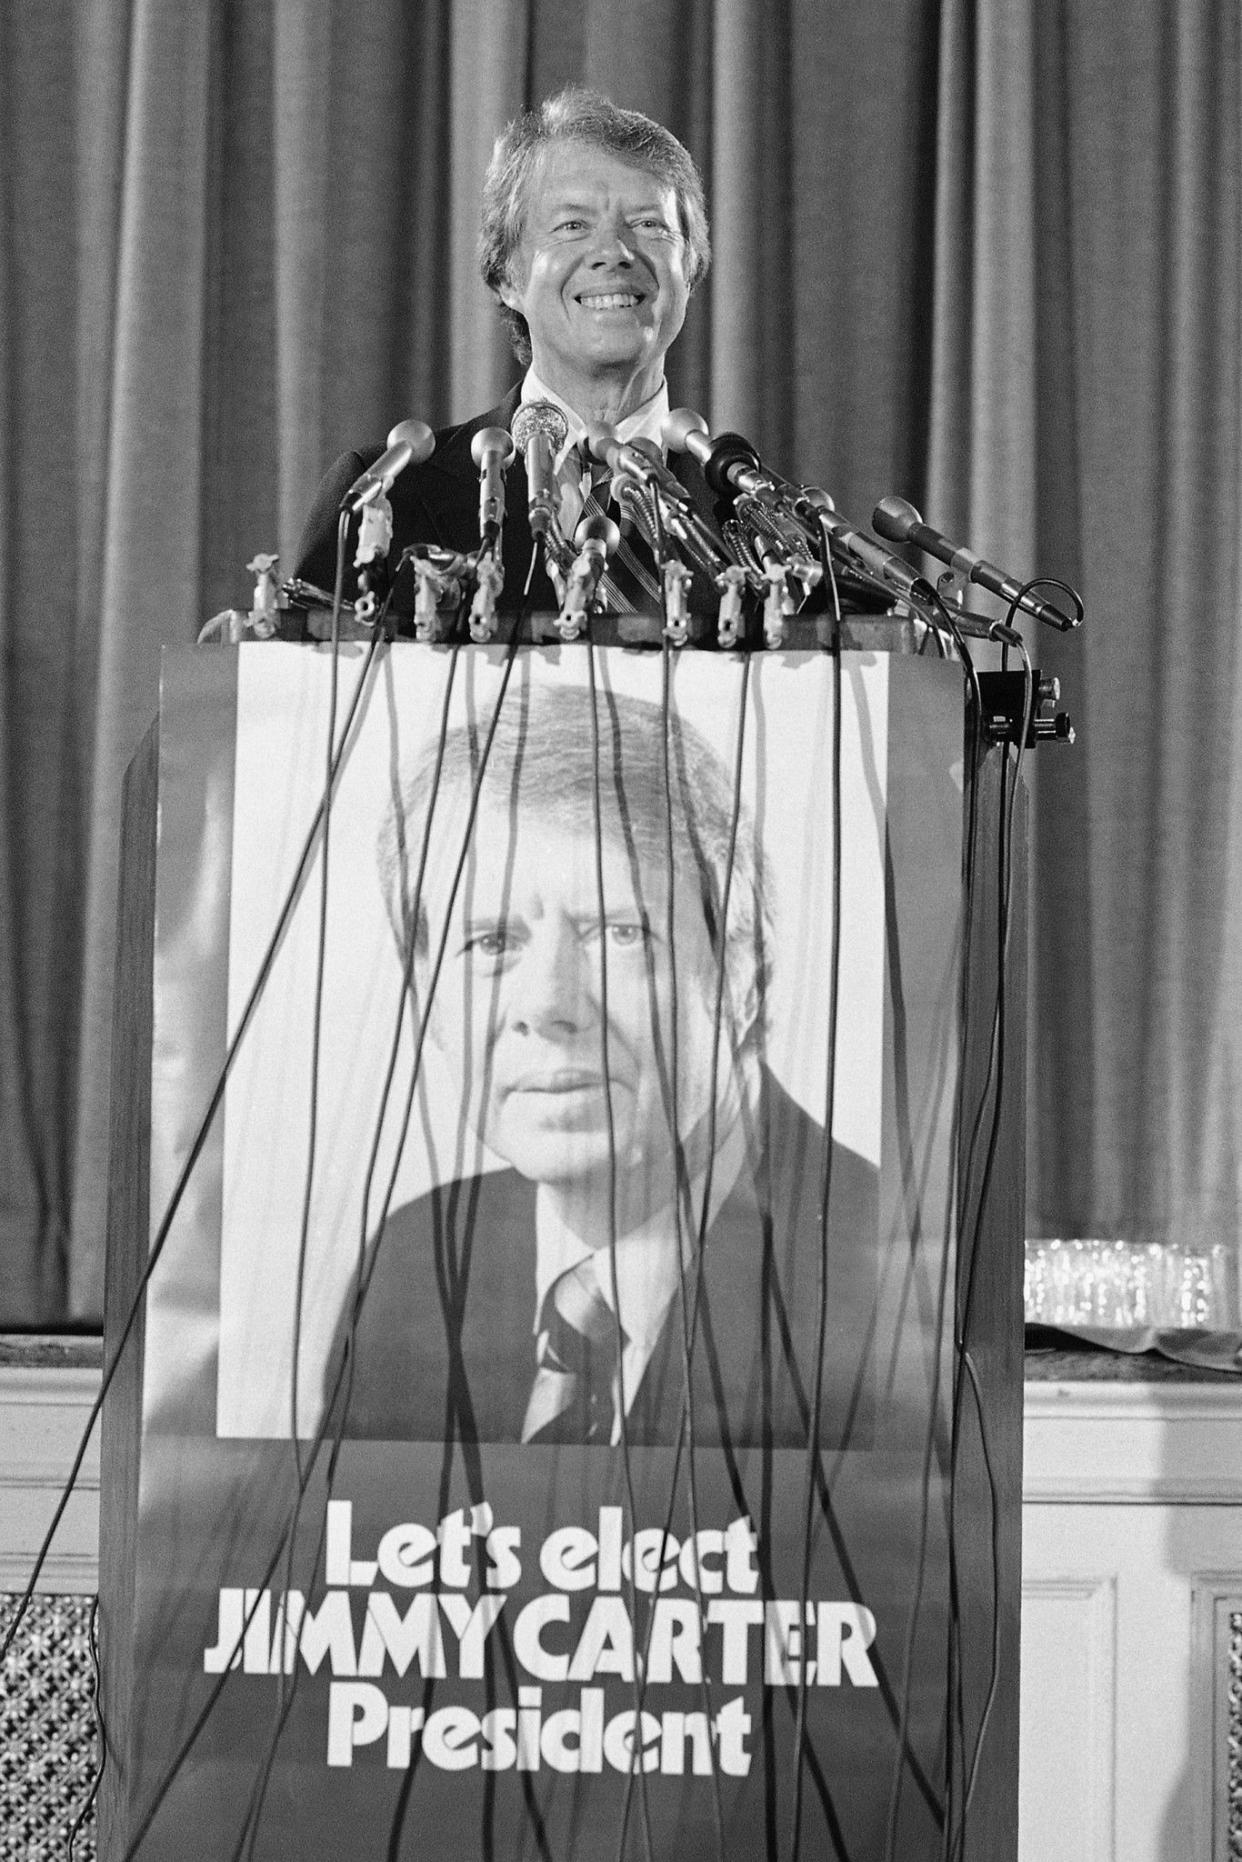 Former Gov. Jimmy Carter of Georgia announces on Aug. 14, 1975, in Washington D.C., that he qualified for federal matching funds to help finance his campaign for the 1976 Democratic presidential nomination. Carter is the fifth Democratic aspirant to become eligible under the new federal financing plan.